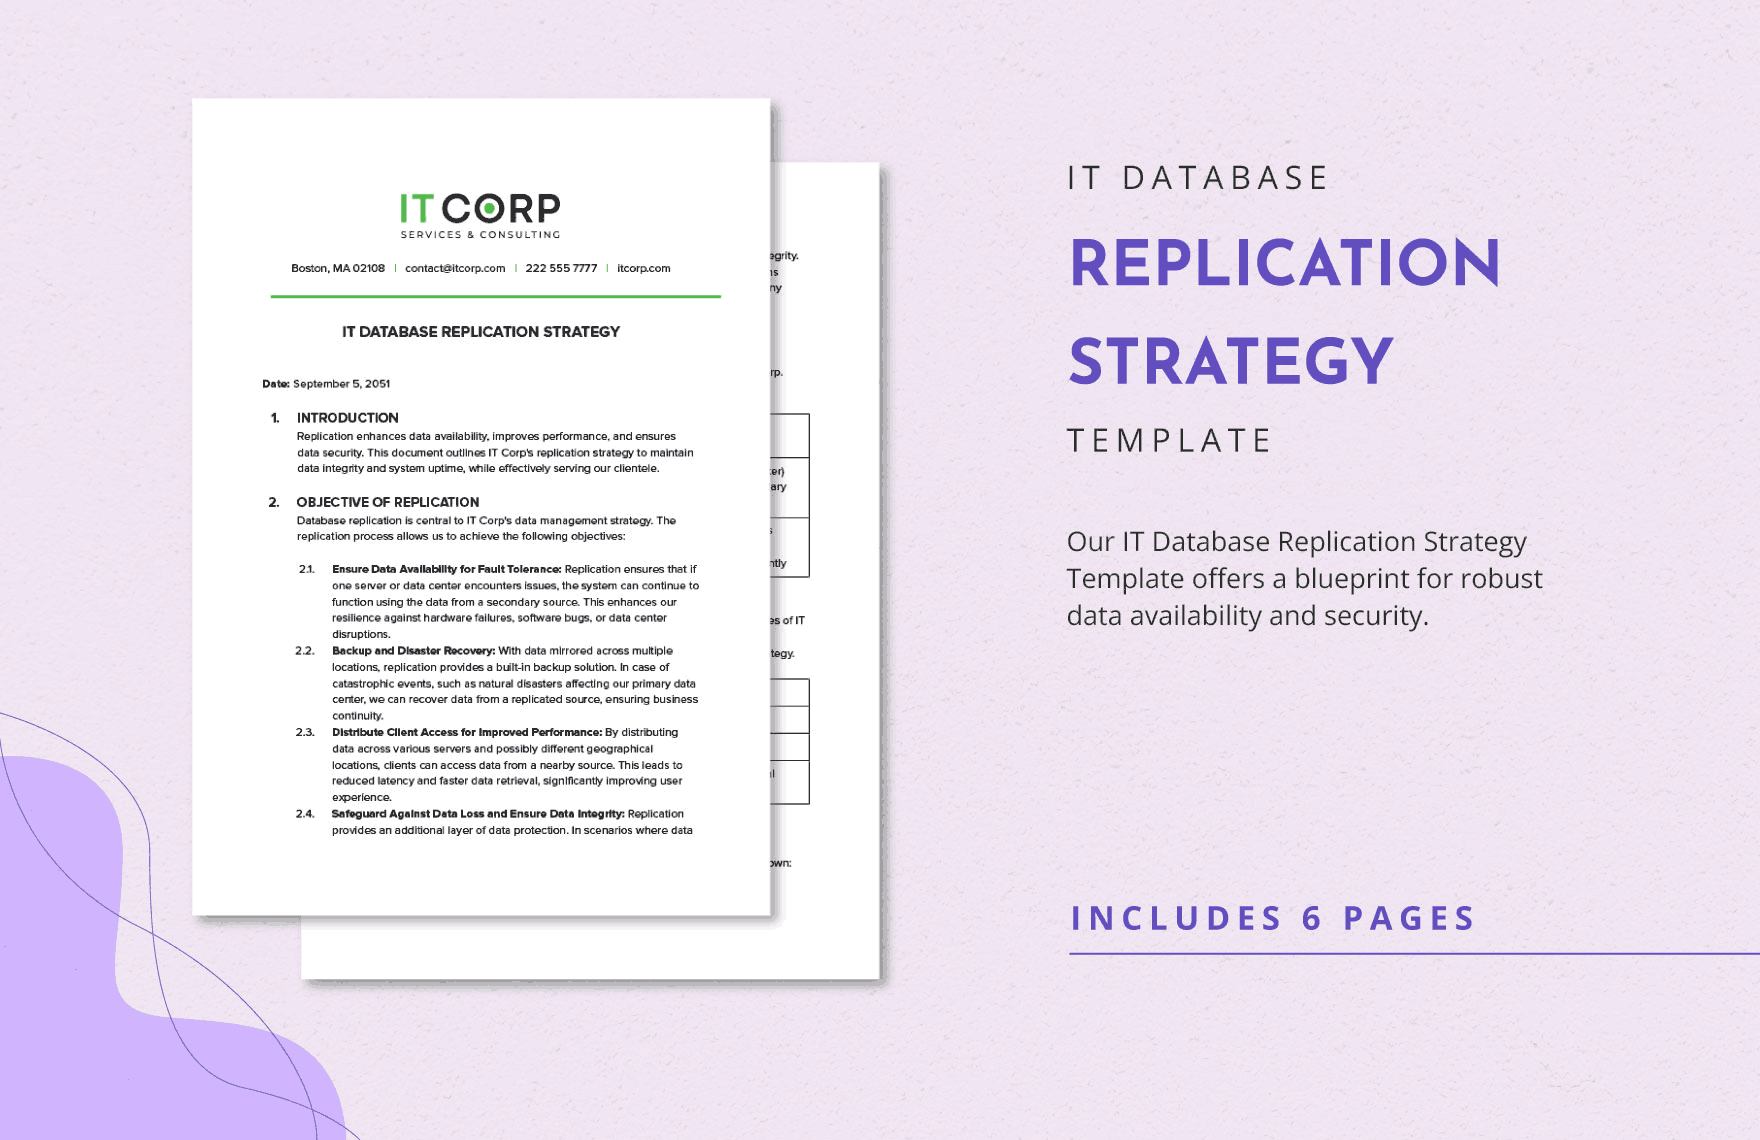 IT Database Replication Strategy Template